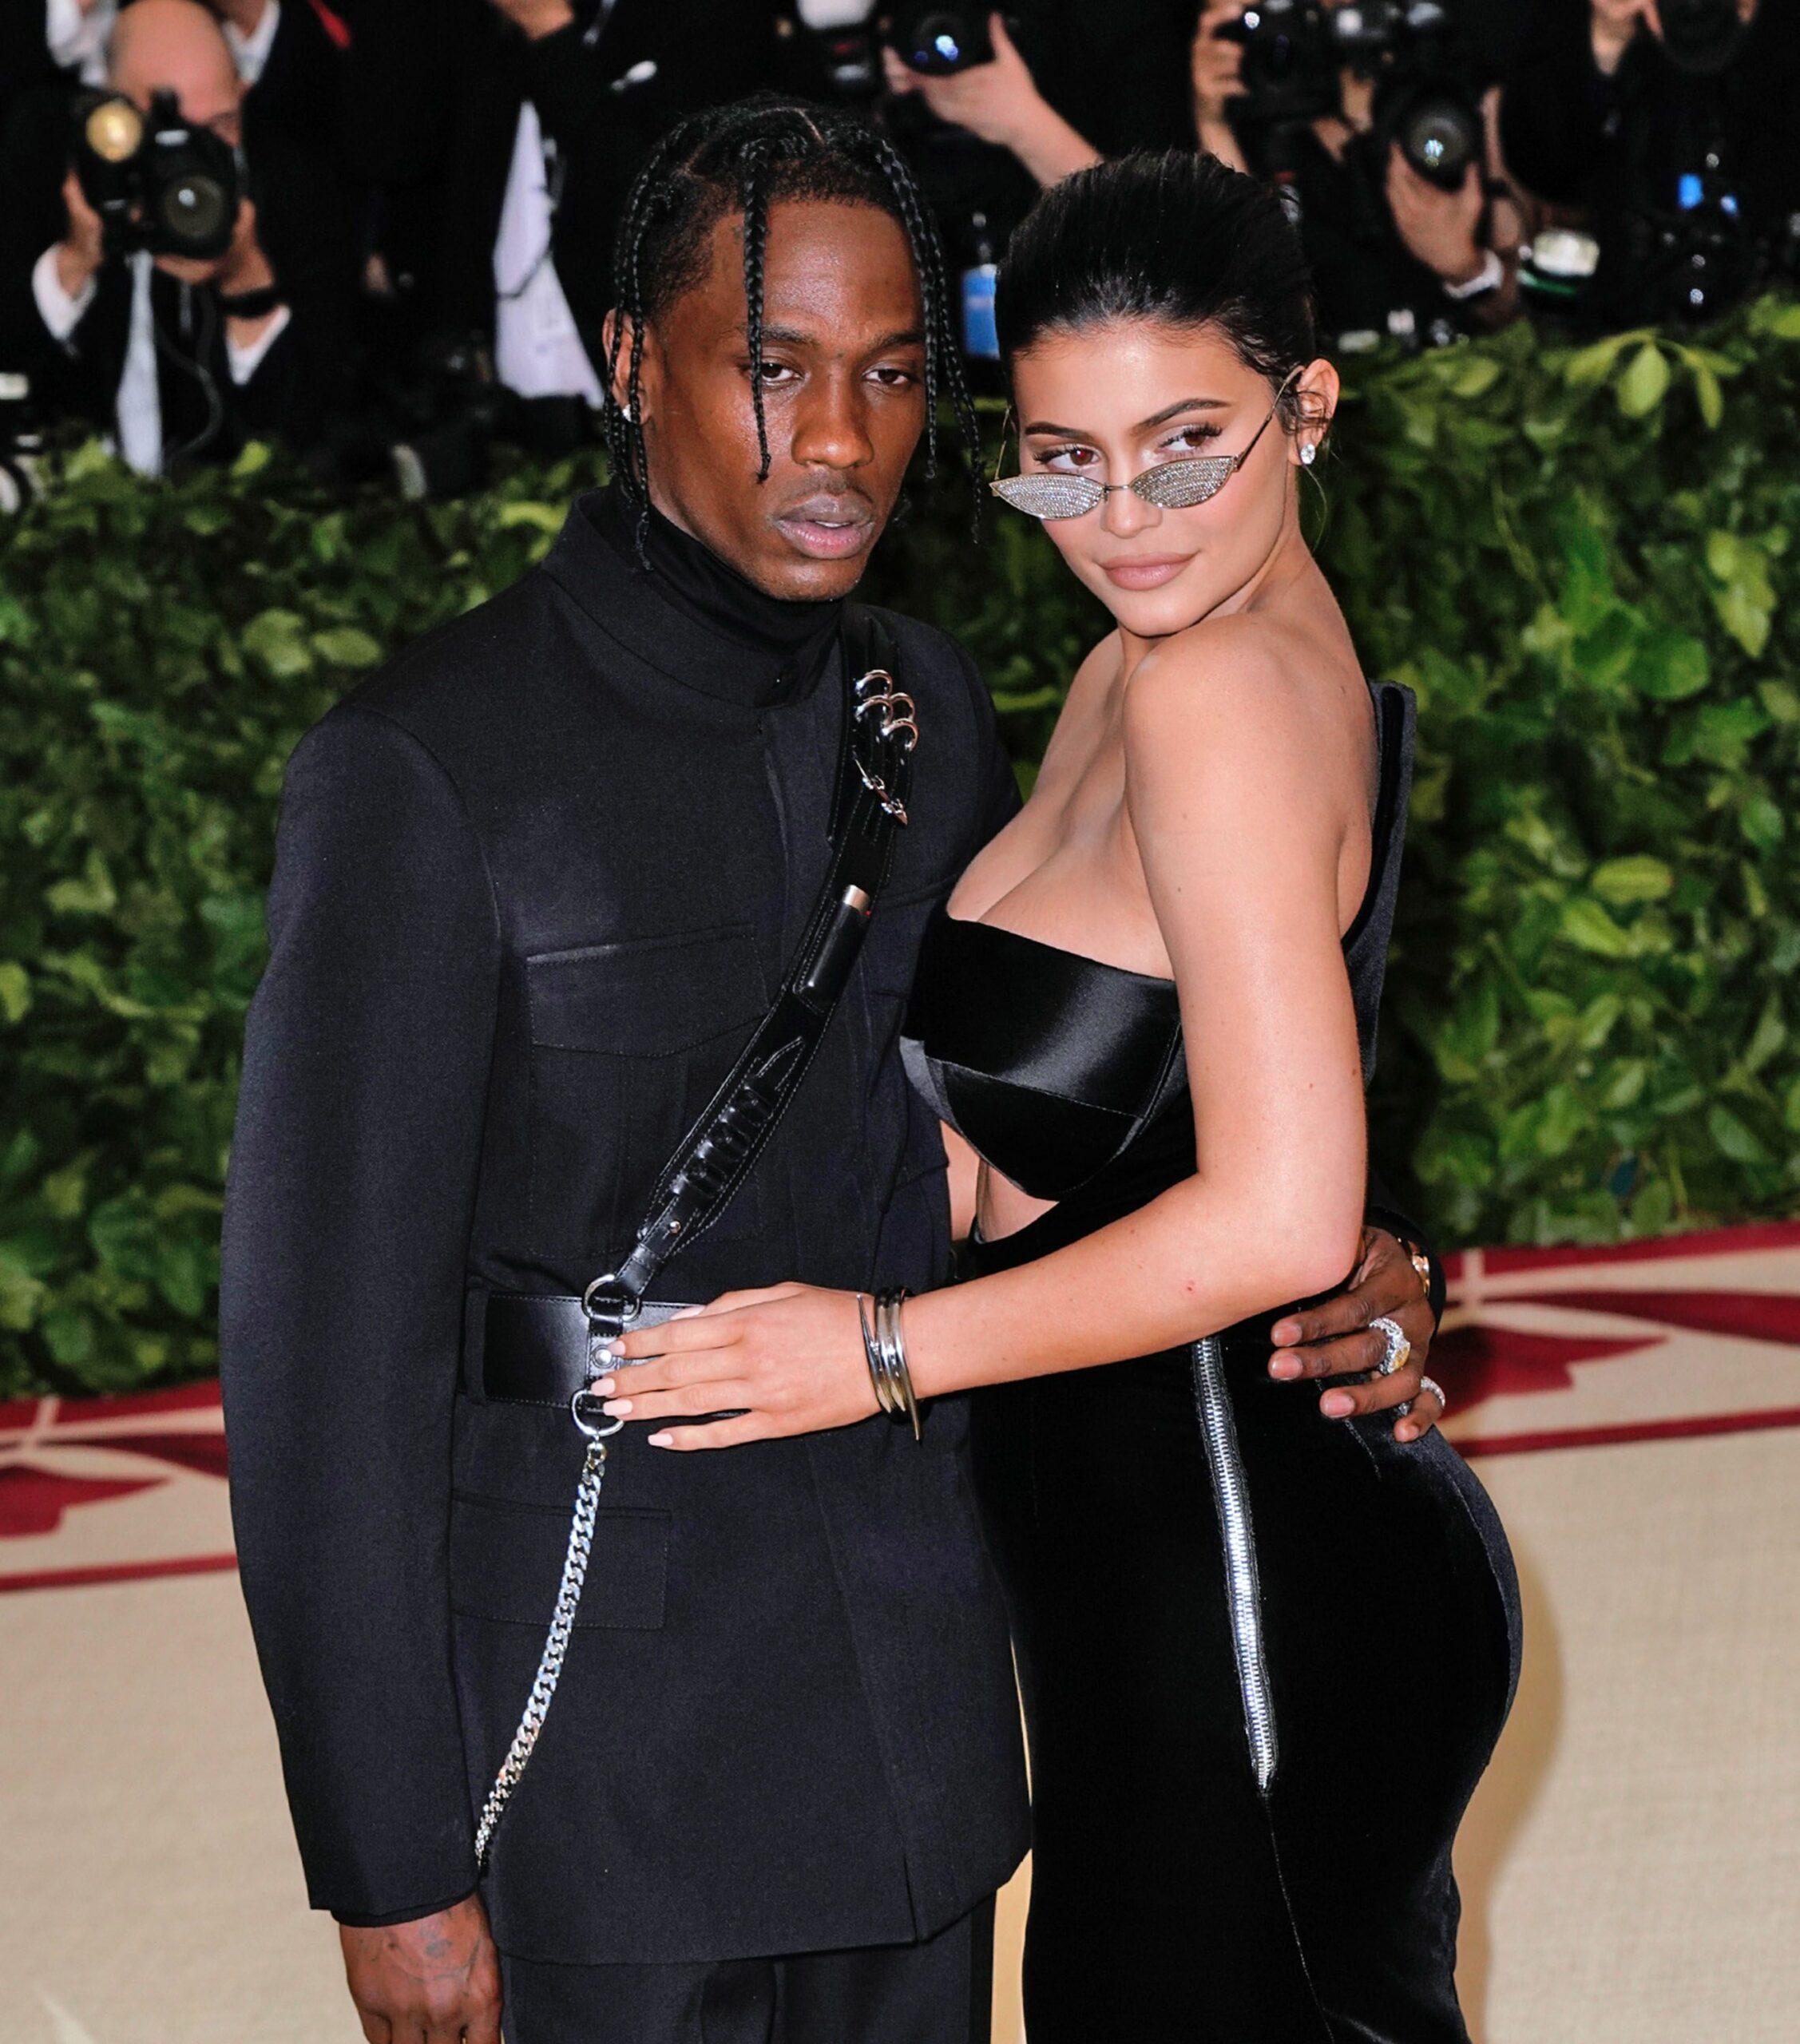 //kylie jenner and travis scott at metropolitan museum of art news photo  scaled